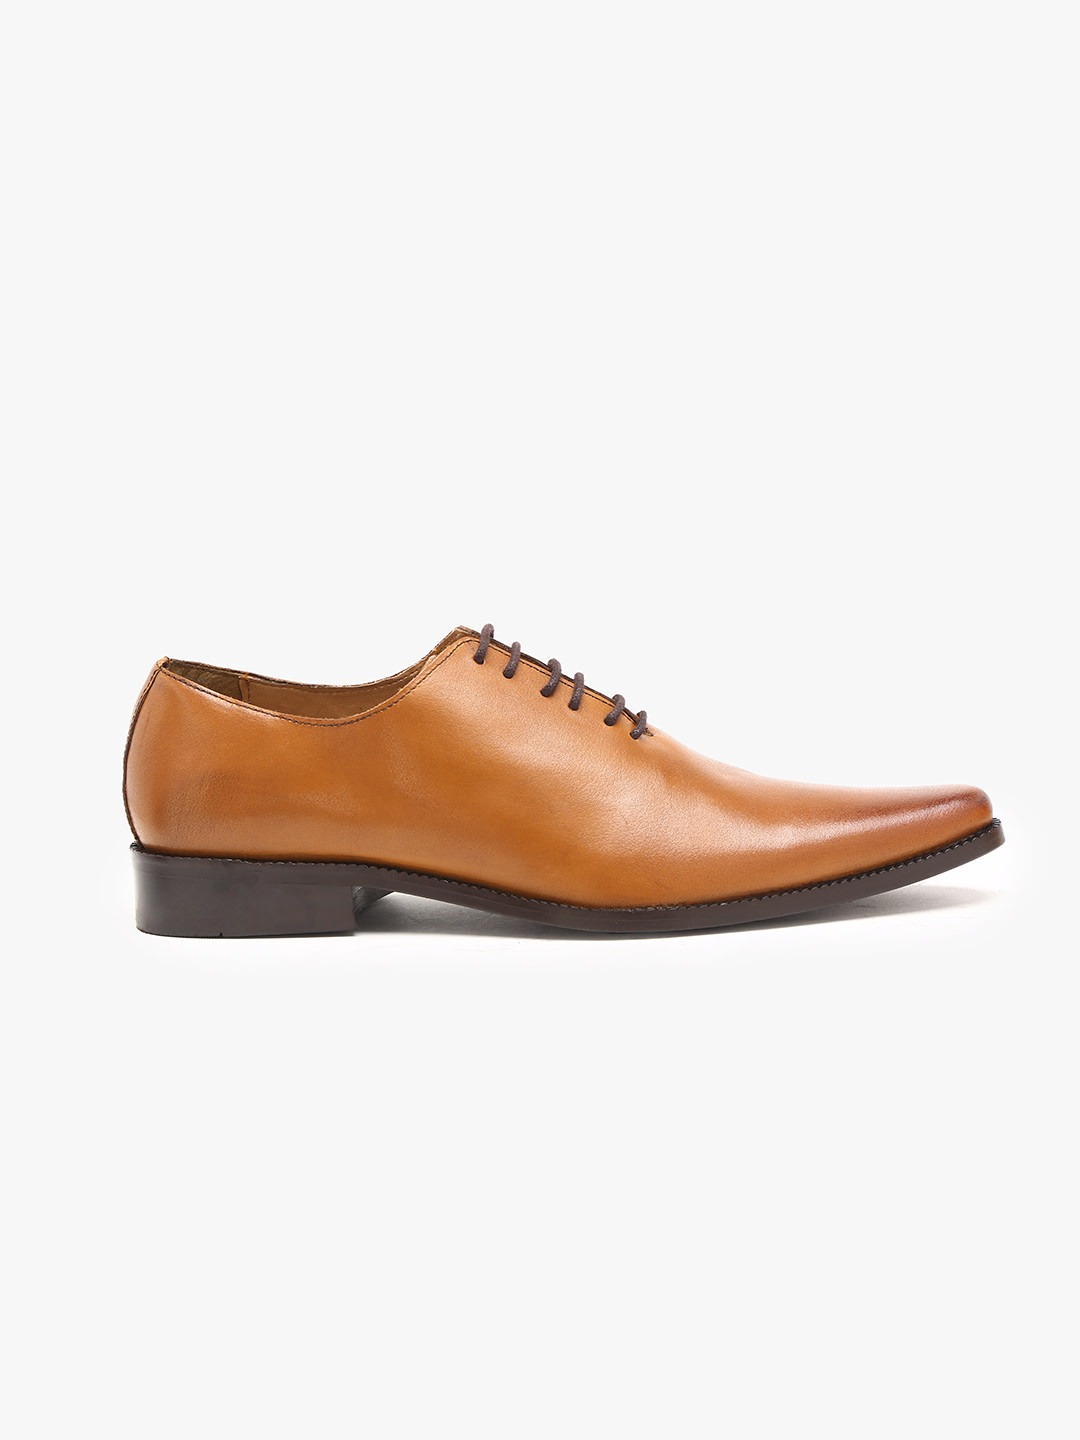 Buy Online Genuine Leather Tan Wholecut Oxford Shoes in India